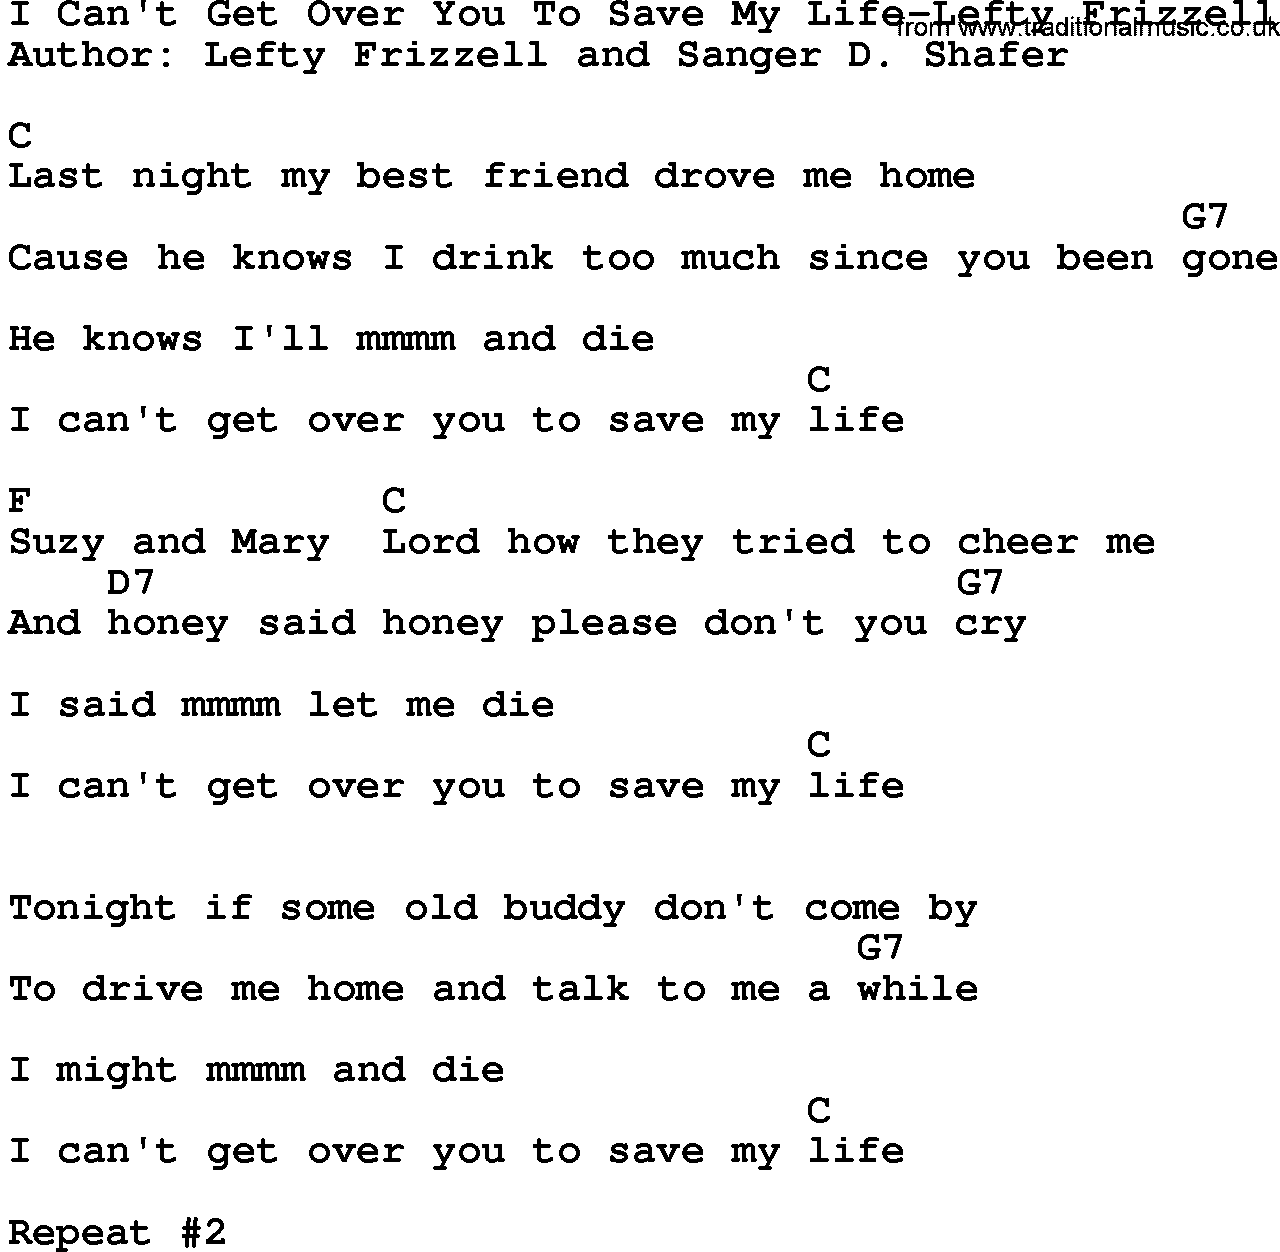 Country music song: I Can't Get Over You To Save My Life-Lefty Frizzell lyrics and chords